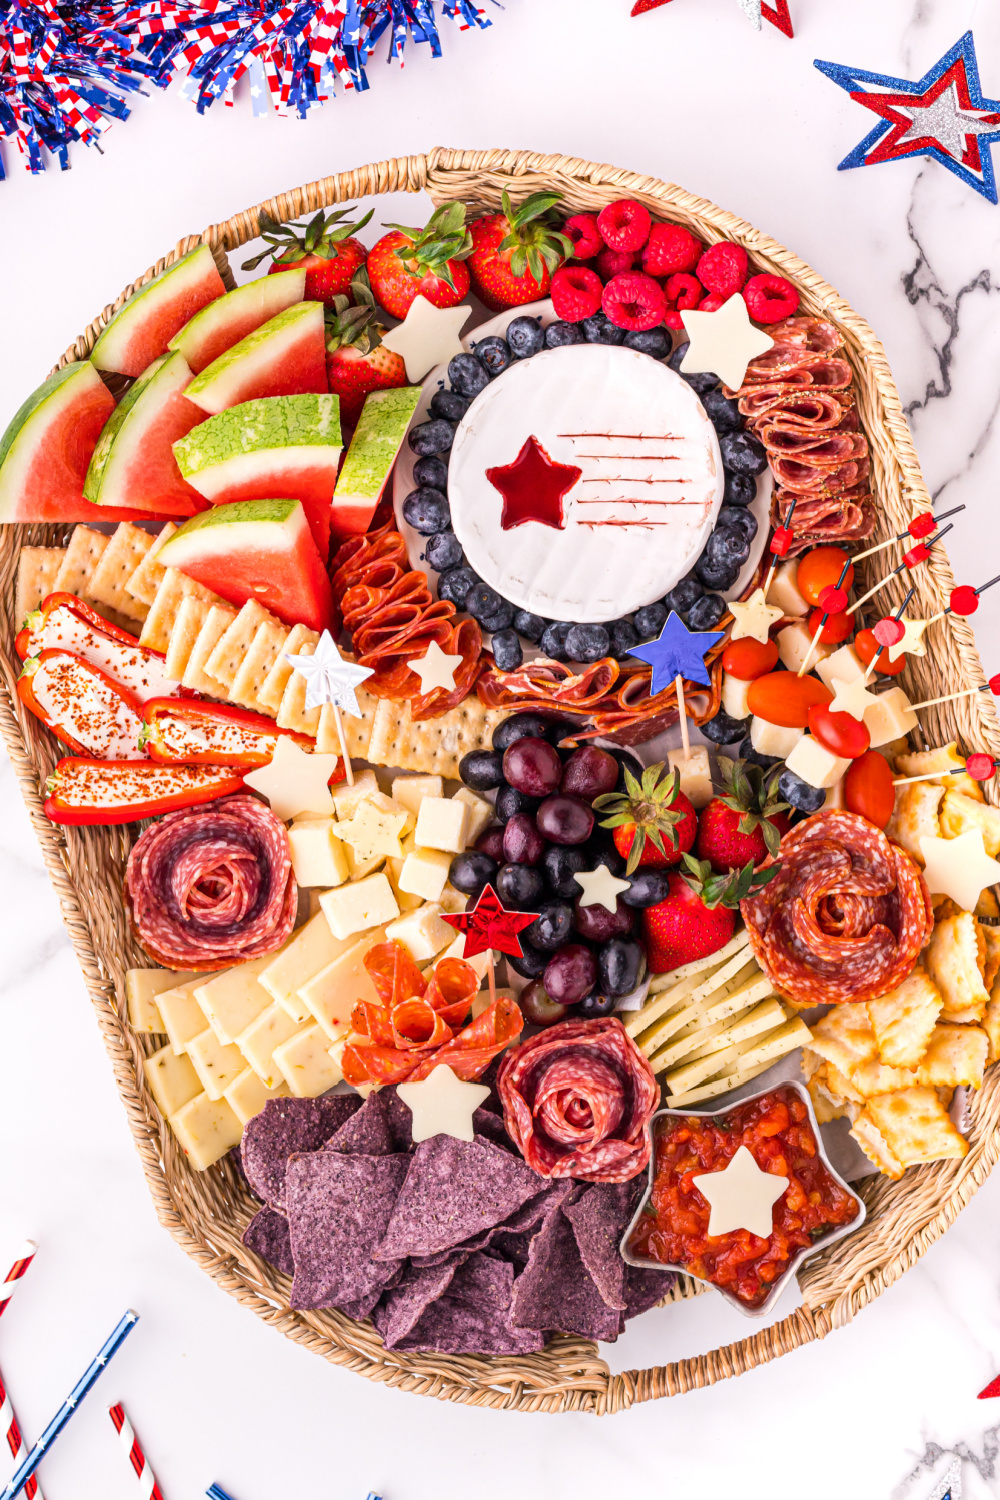 It’s time to enjoy the summer and celebrate! This 4th of July Meat and Cheese Charcuterie Tray is the perfect way to feed all your guests. via @familyfresh